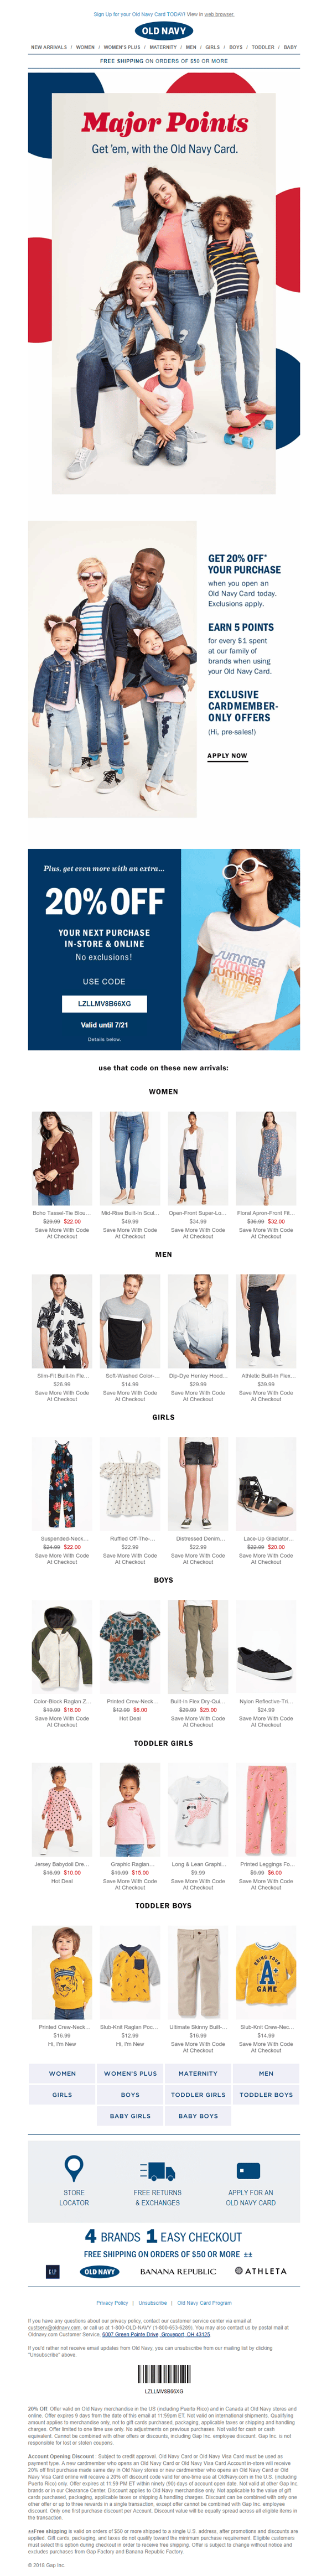 Old Navy Discount Email